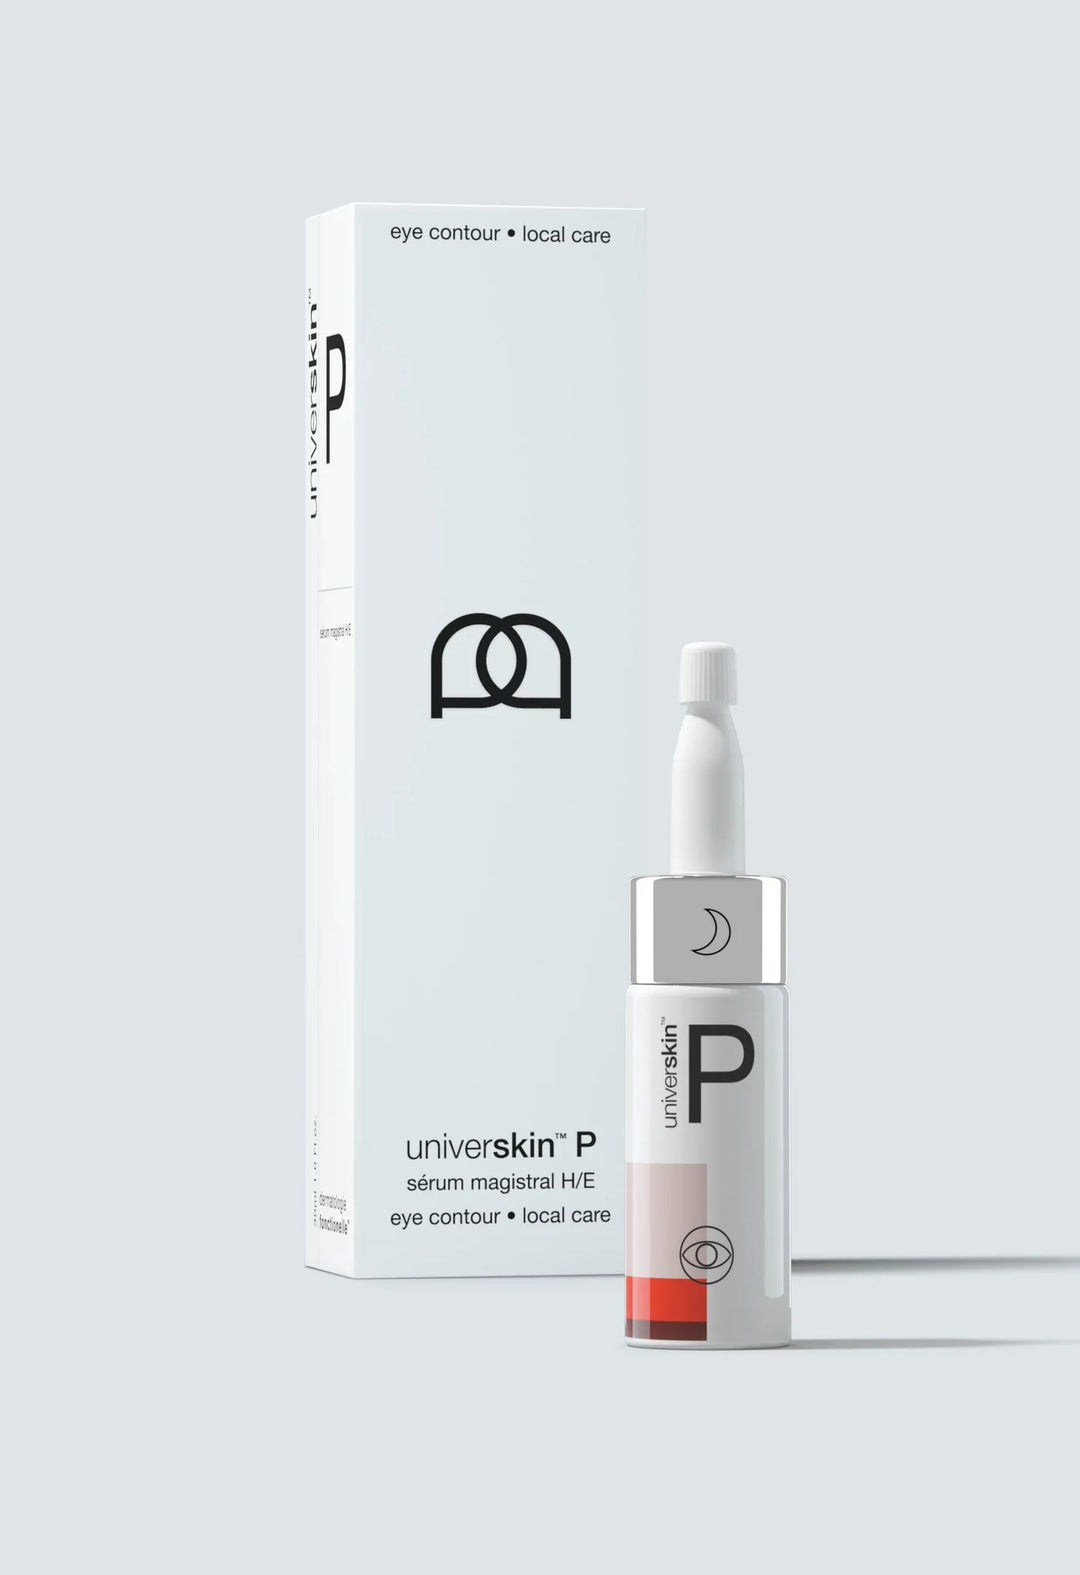 FORMULA 49 - SUPER SKIN BOOSTER - FOR A REFRESHED, LIFTED AND SMOOTH EYE CONTOUR - EYE CONTOUR SERUM